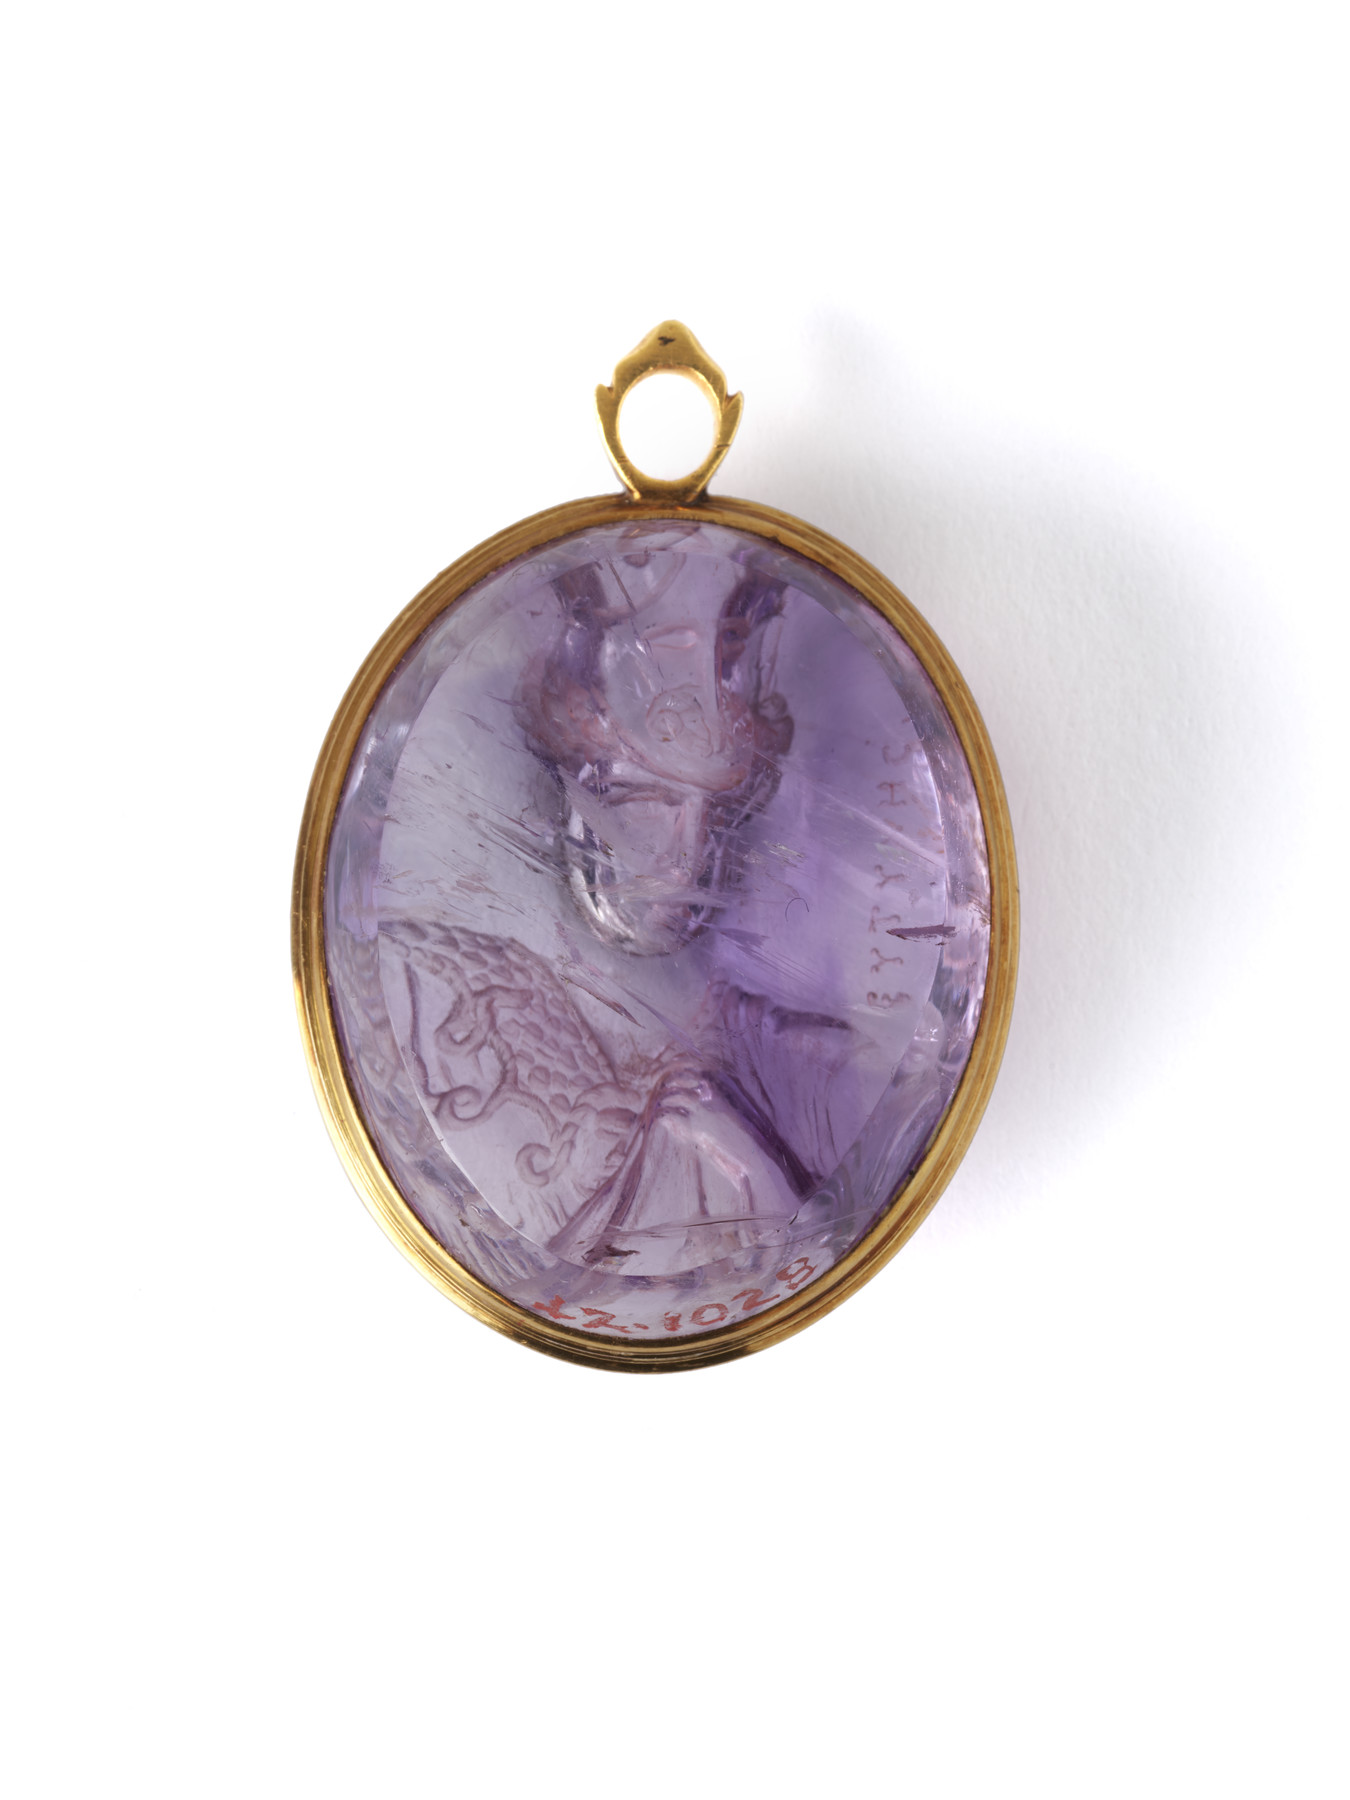 Image for Pendant with an Intaglio of Pallas Athena